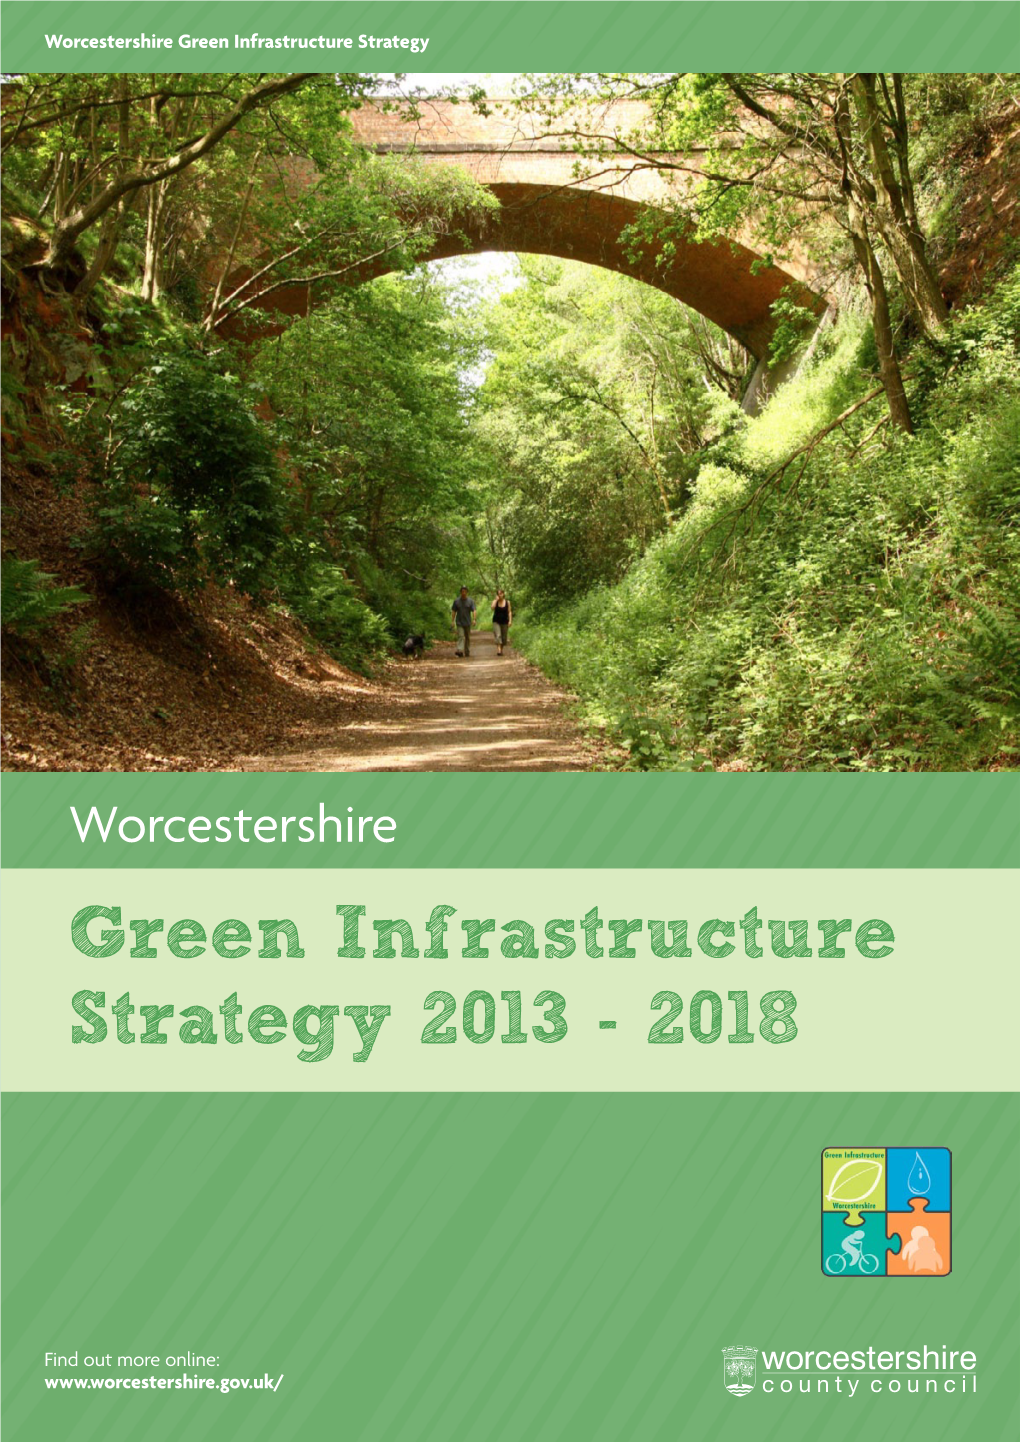 Green Infrastructure Strategy 2013 - 2018